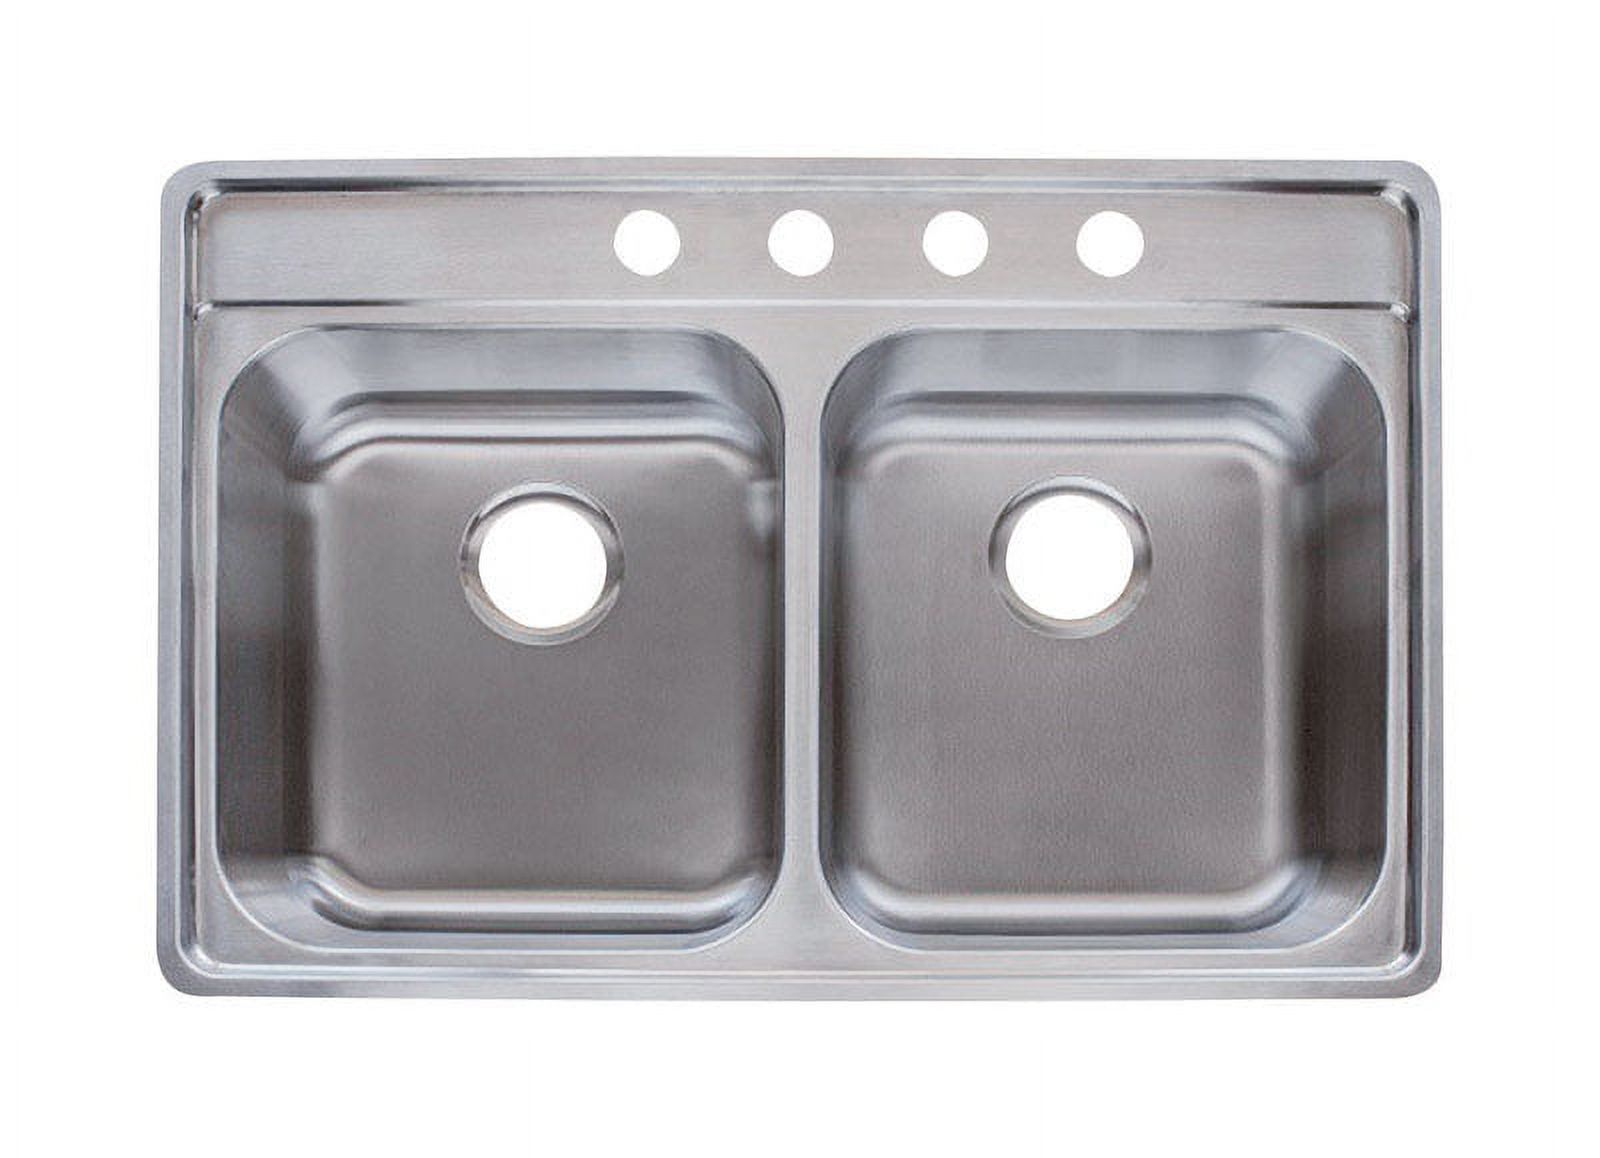 Franke Stainless Steel Top Mount 14.687 in. W X 18.187 in. L Double Bowl Kitchen Sink Silver - image 2 of 2